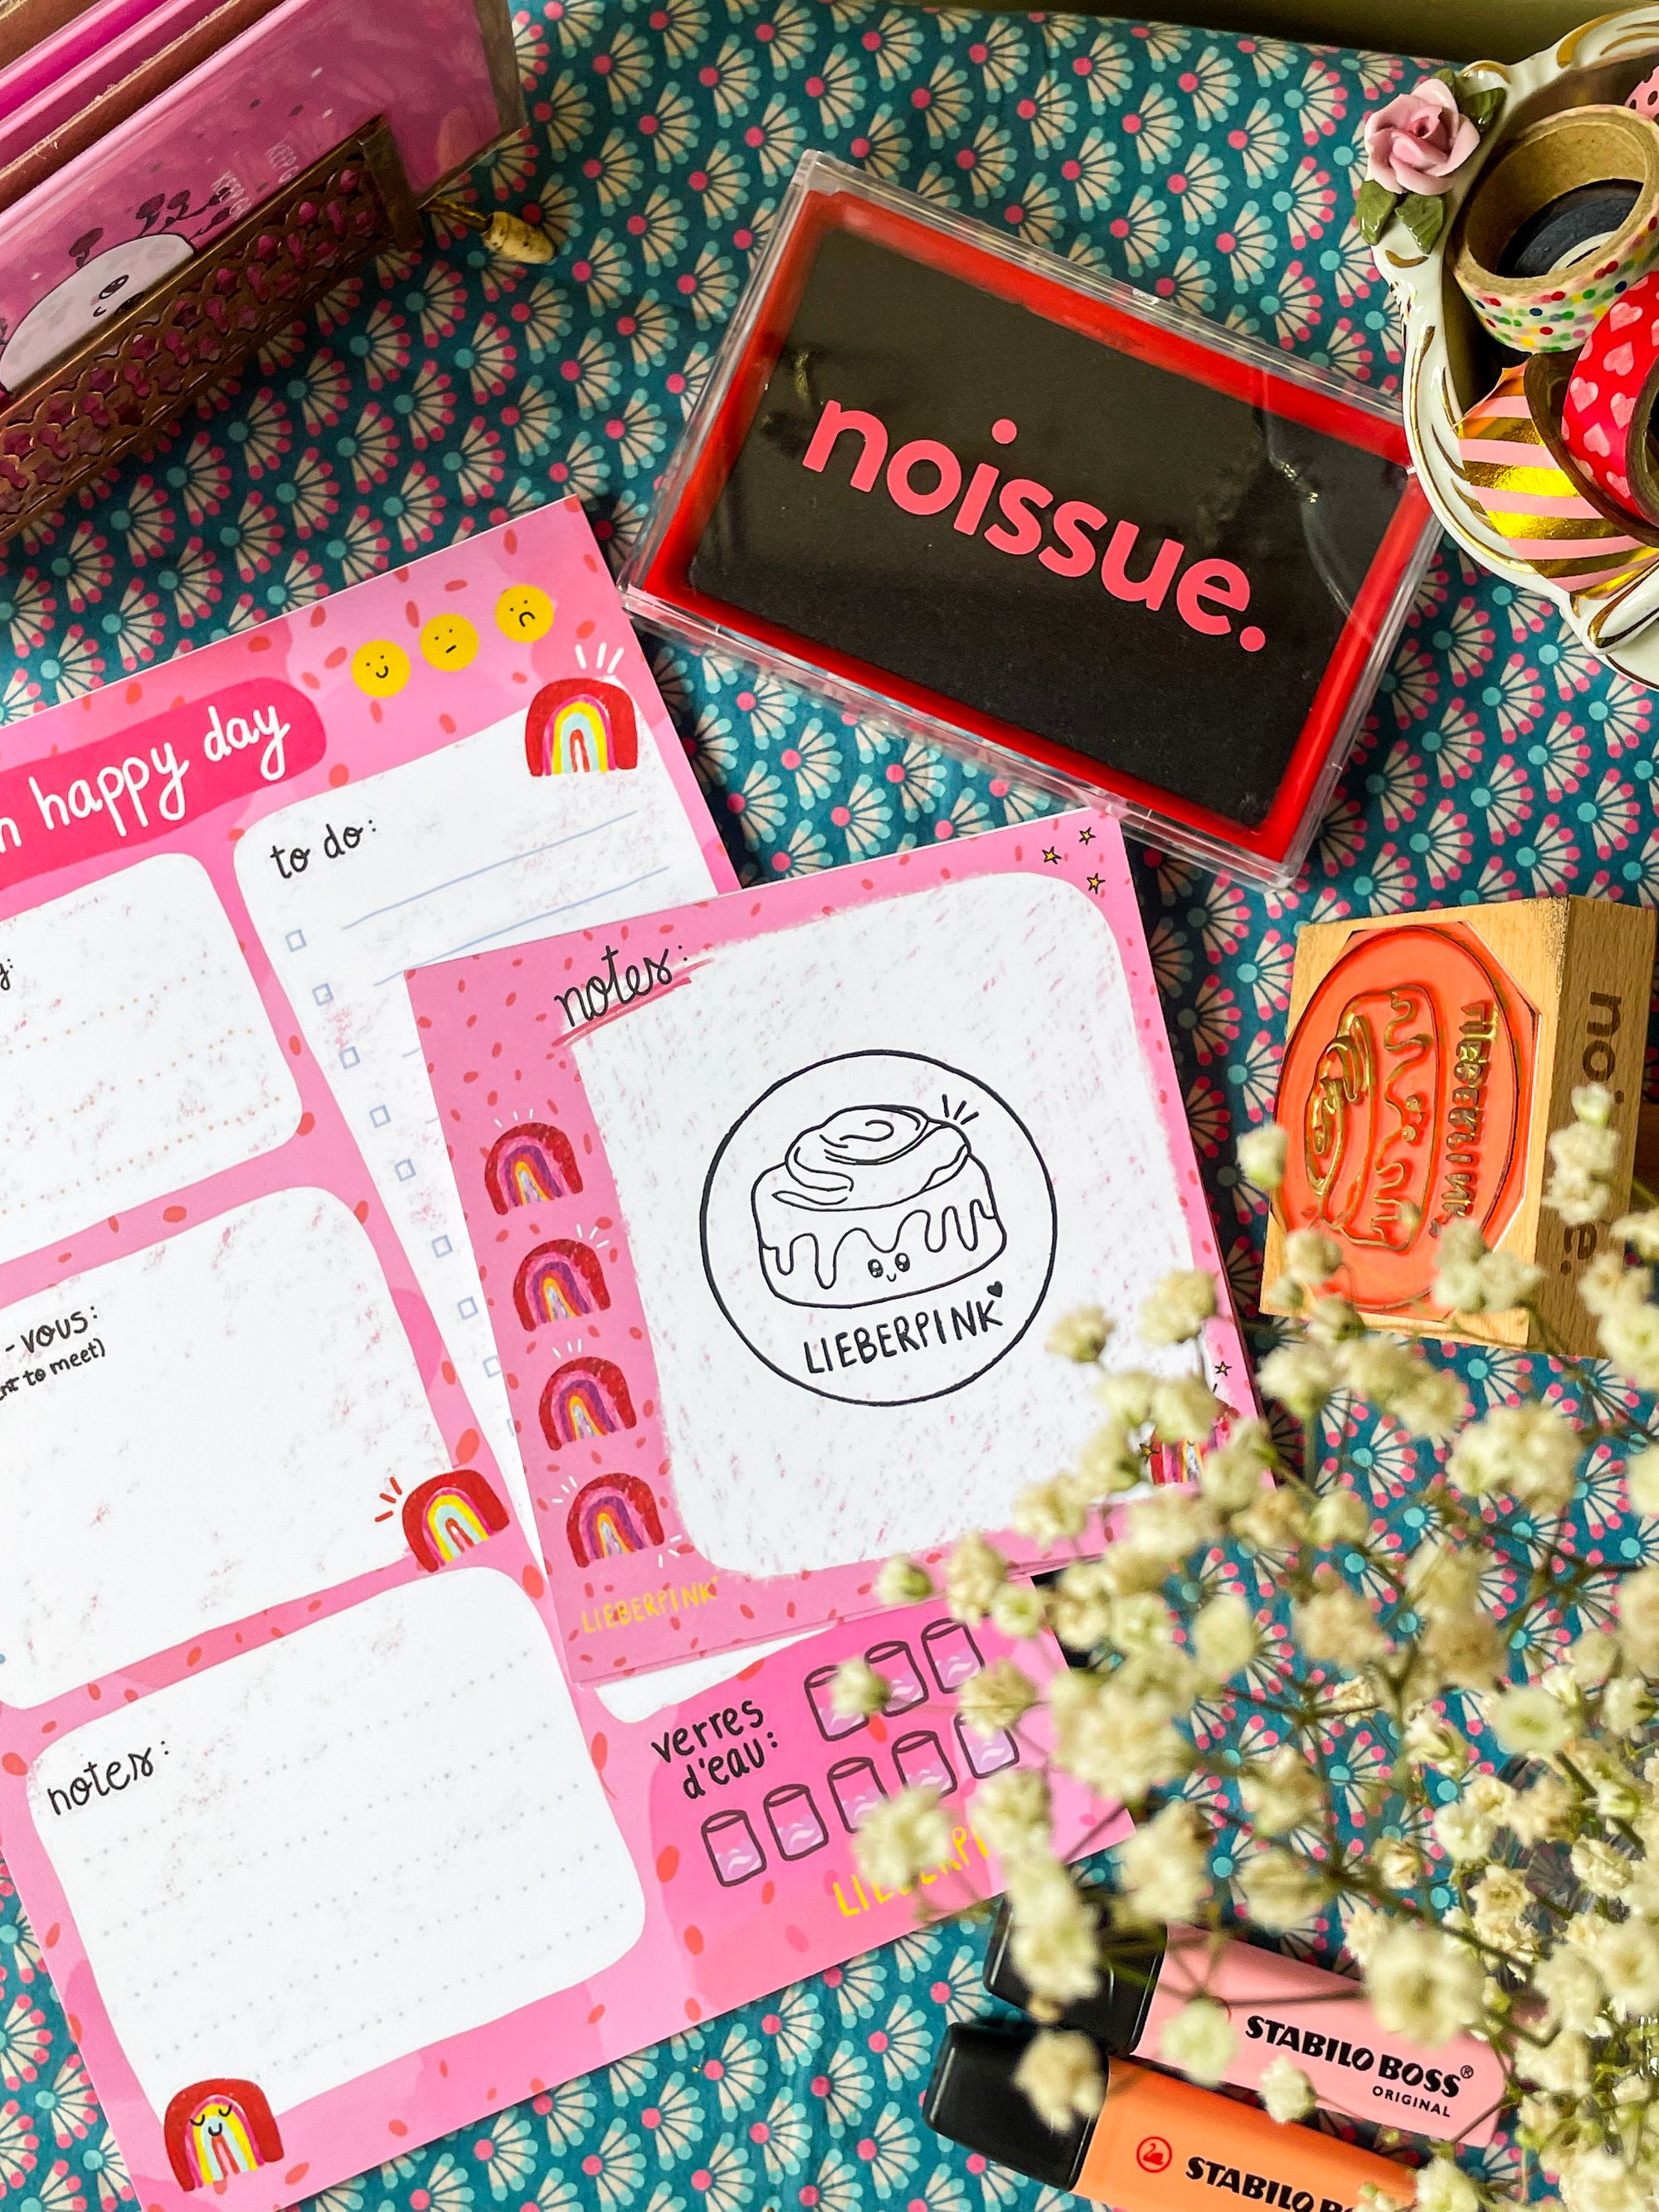 Lieberpink: The Most Pink-credibly Charming Stationeries You’ll Ever Need